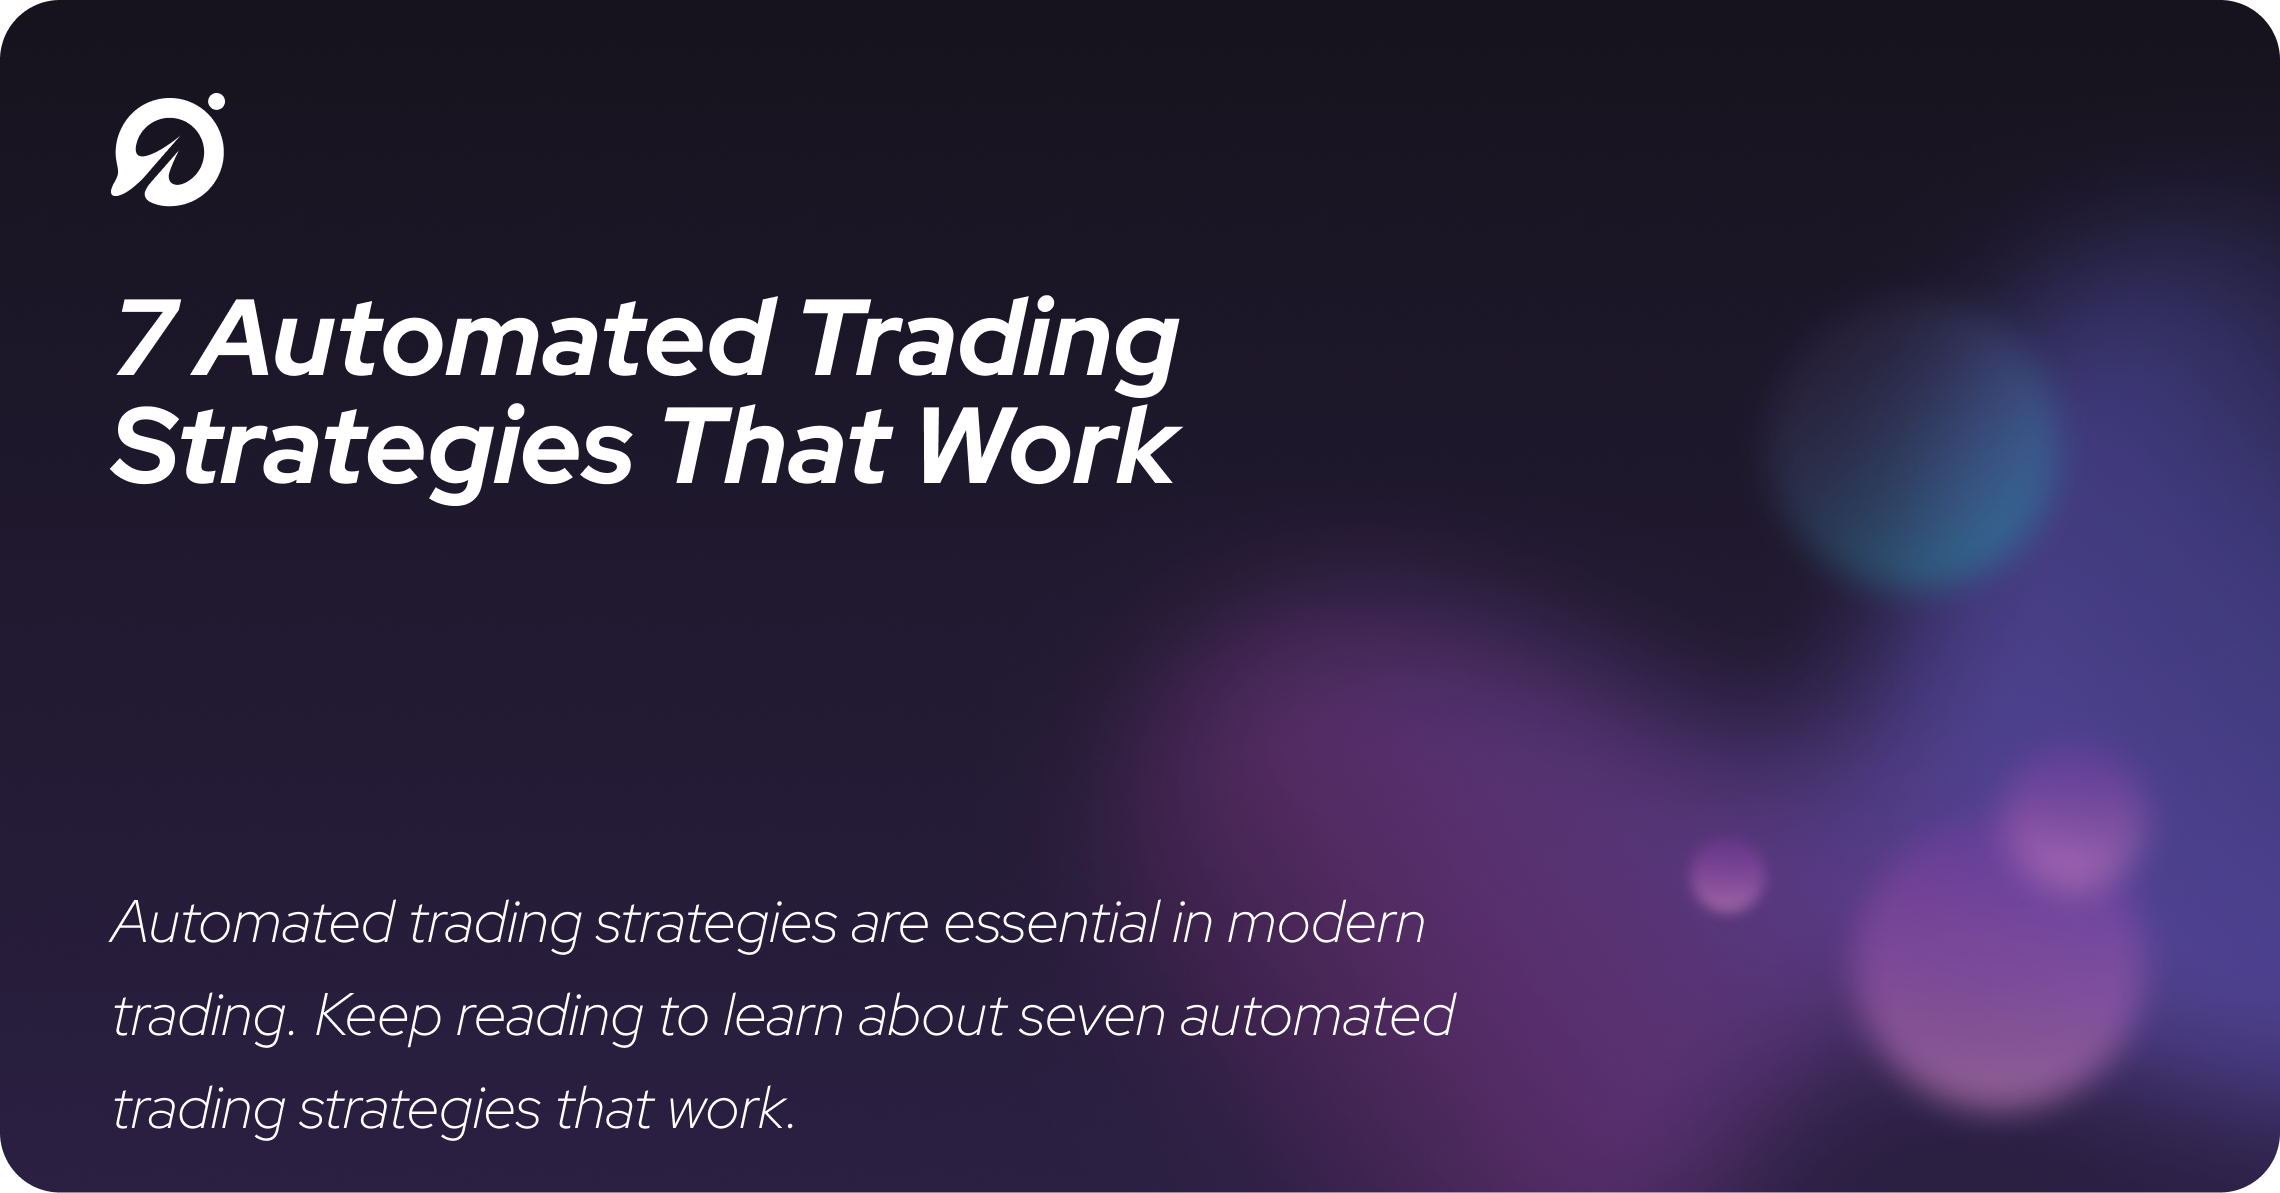 7 Automated Trading Strategies That Work